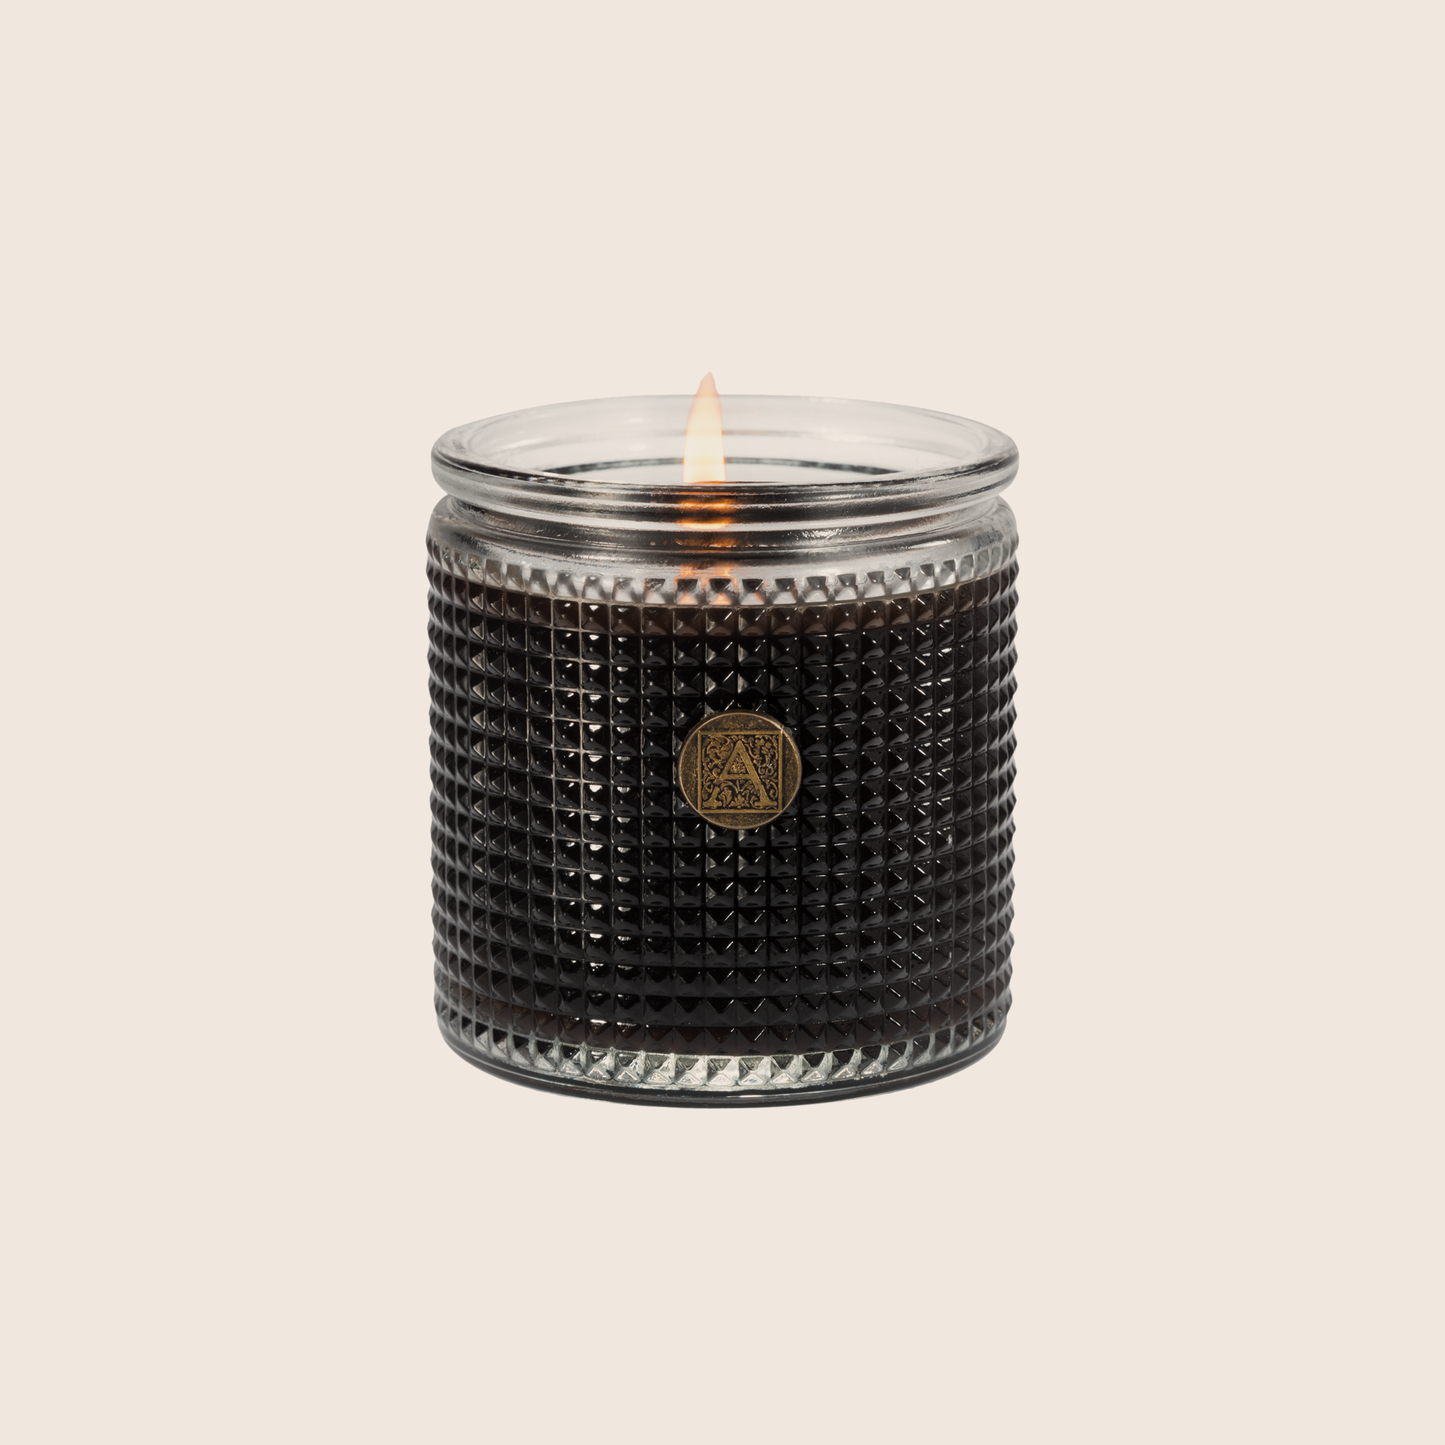 Aromatique The Smell of Espresso Textured Glass Candle